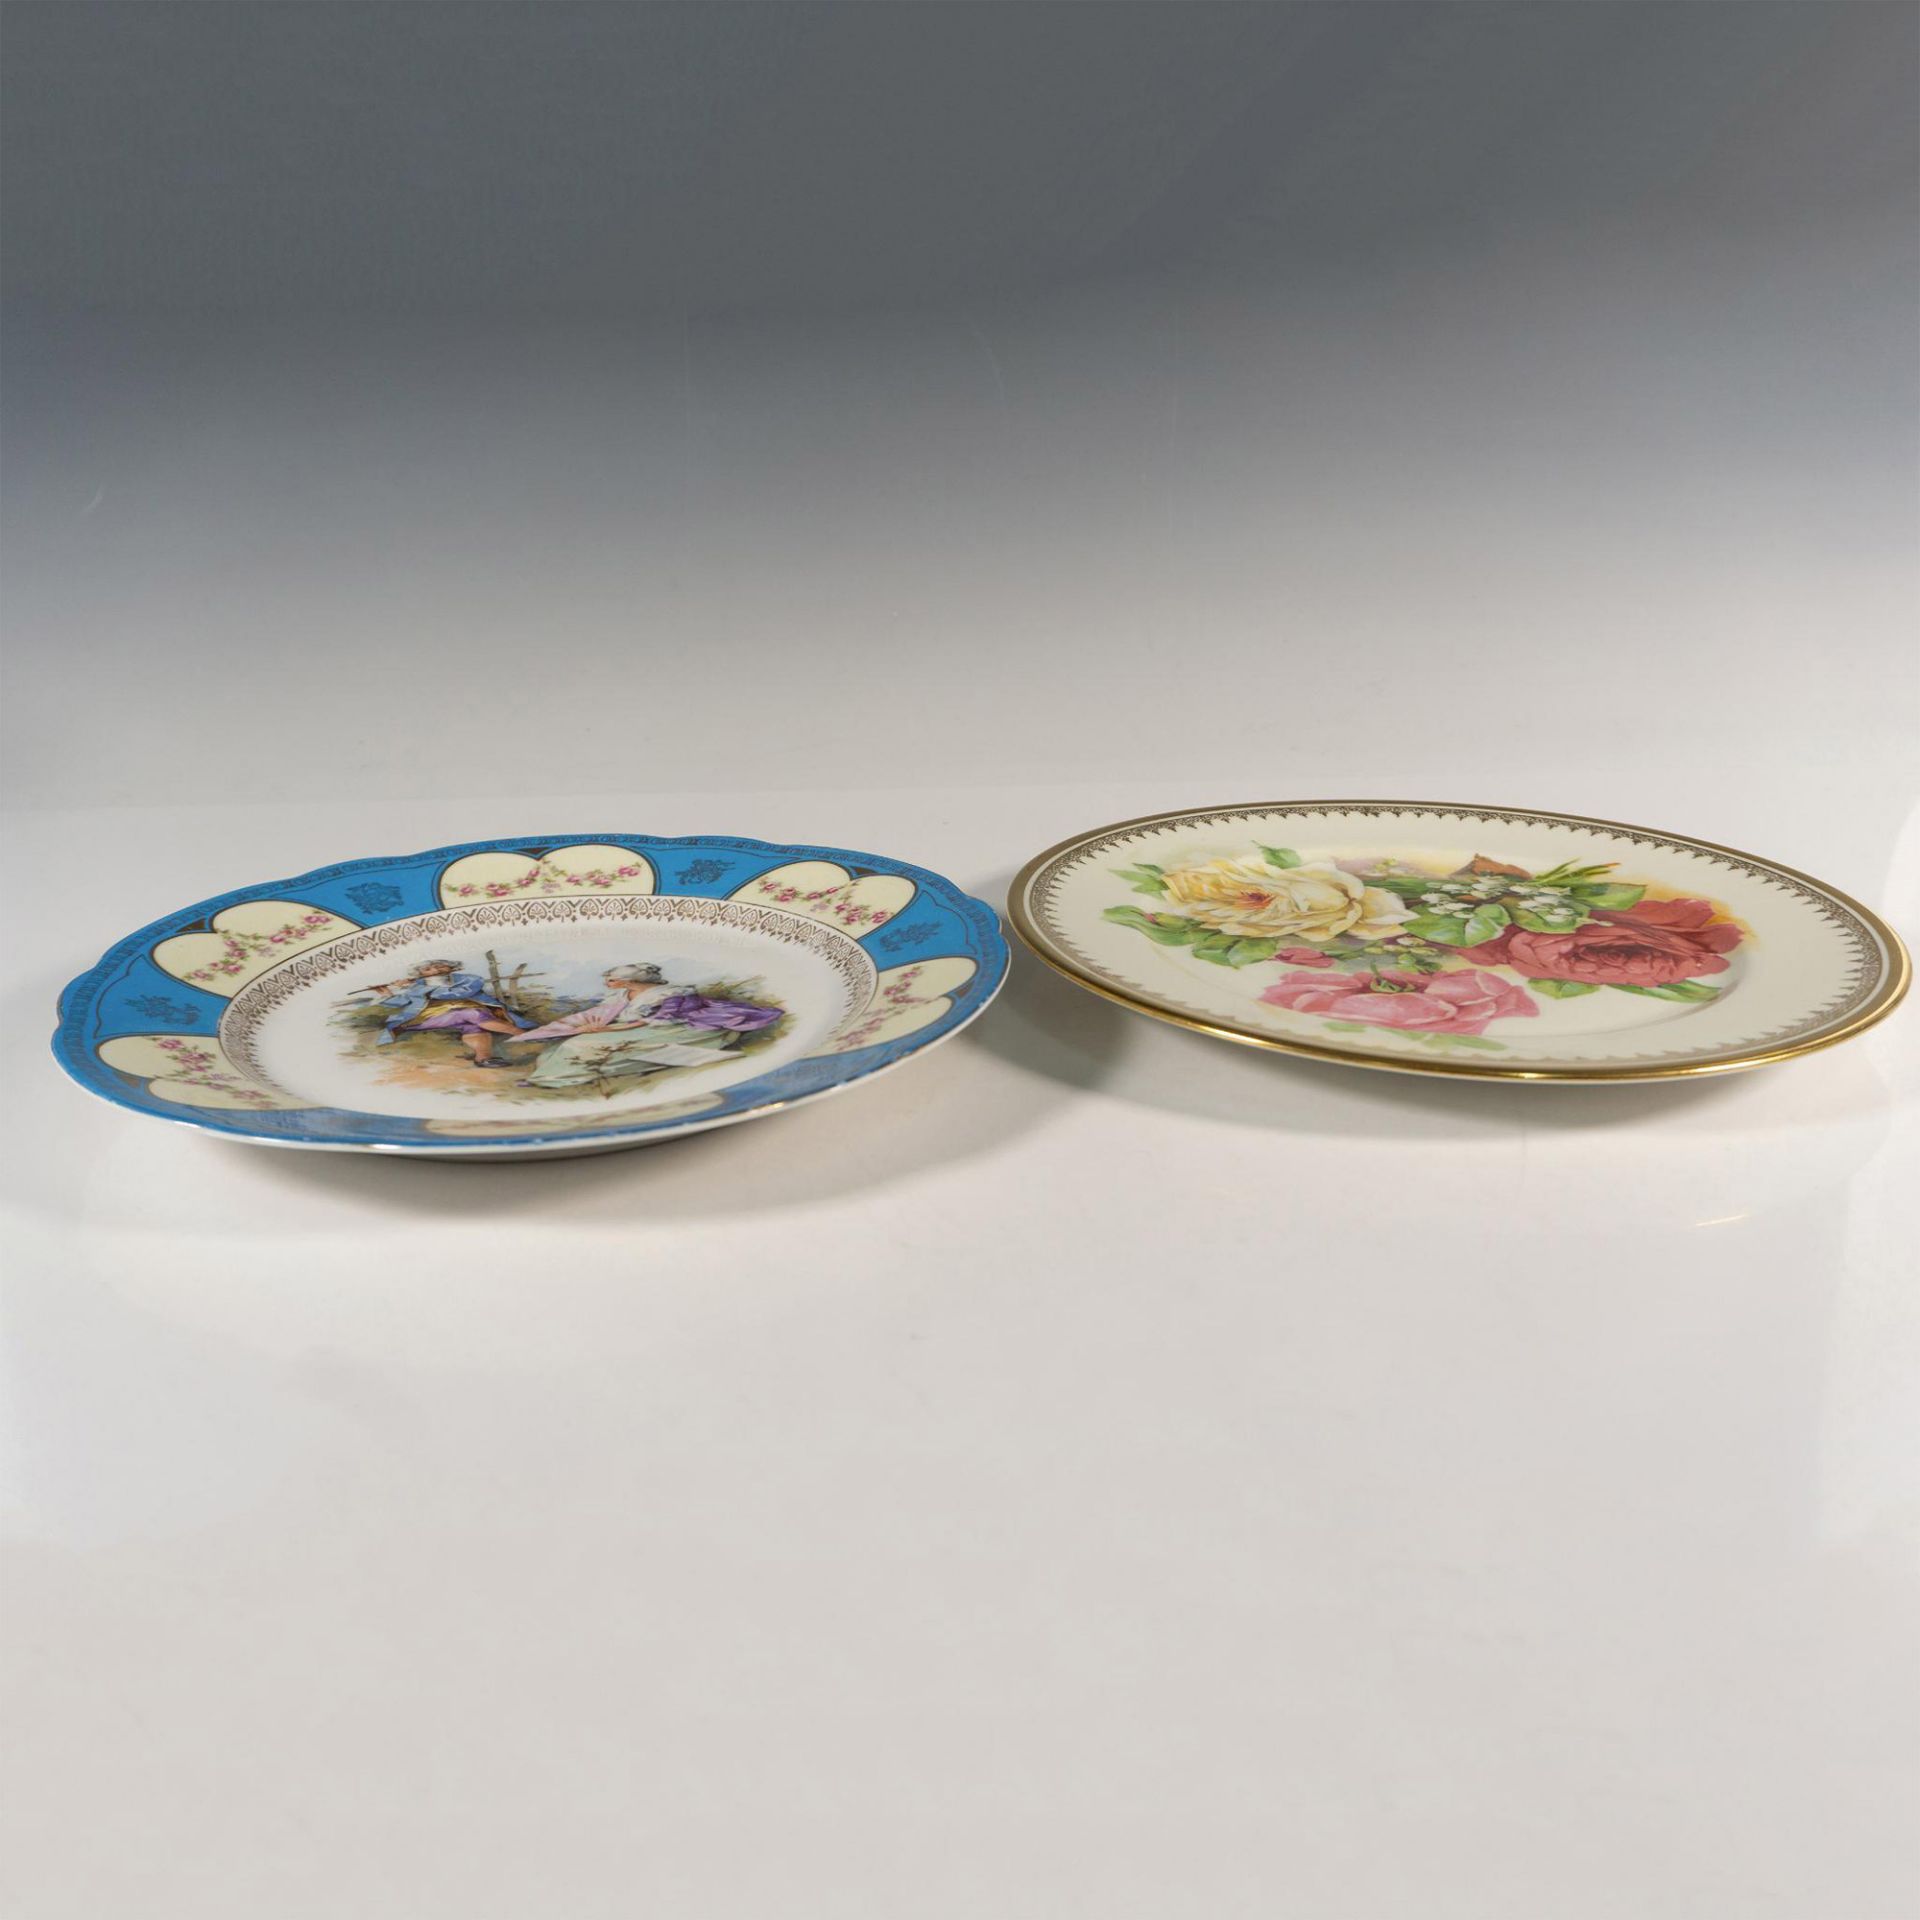 2pc Vintage Handpainted China Plates, Rosenthal and C.T. - Image 3 of 3